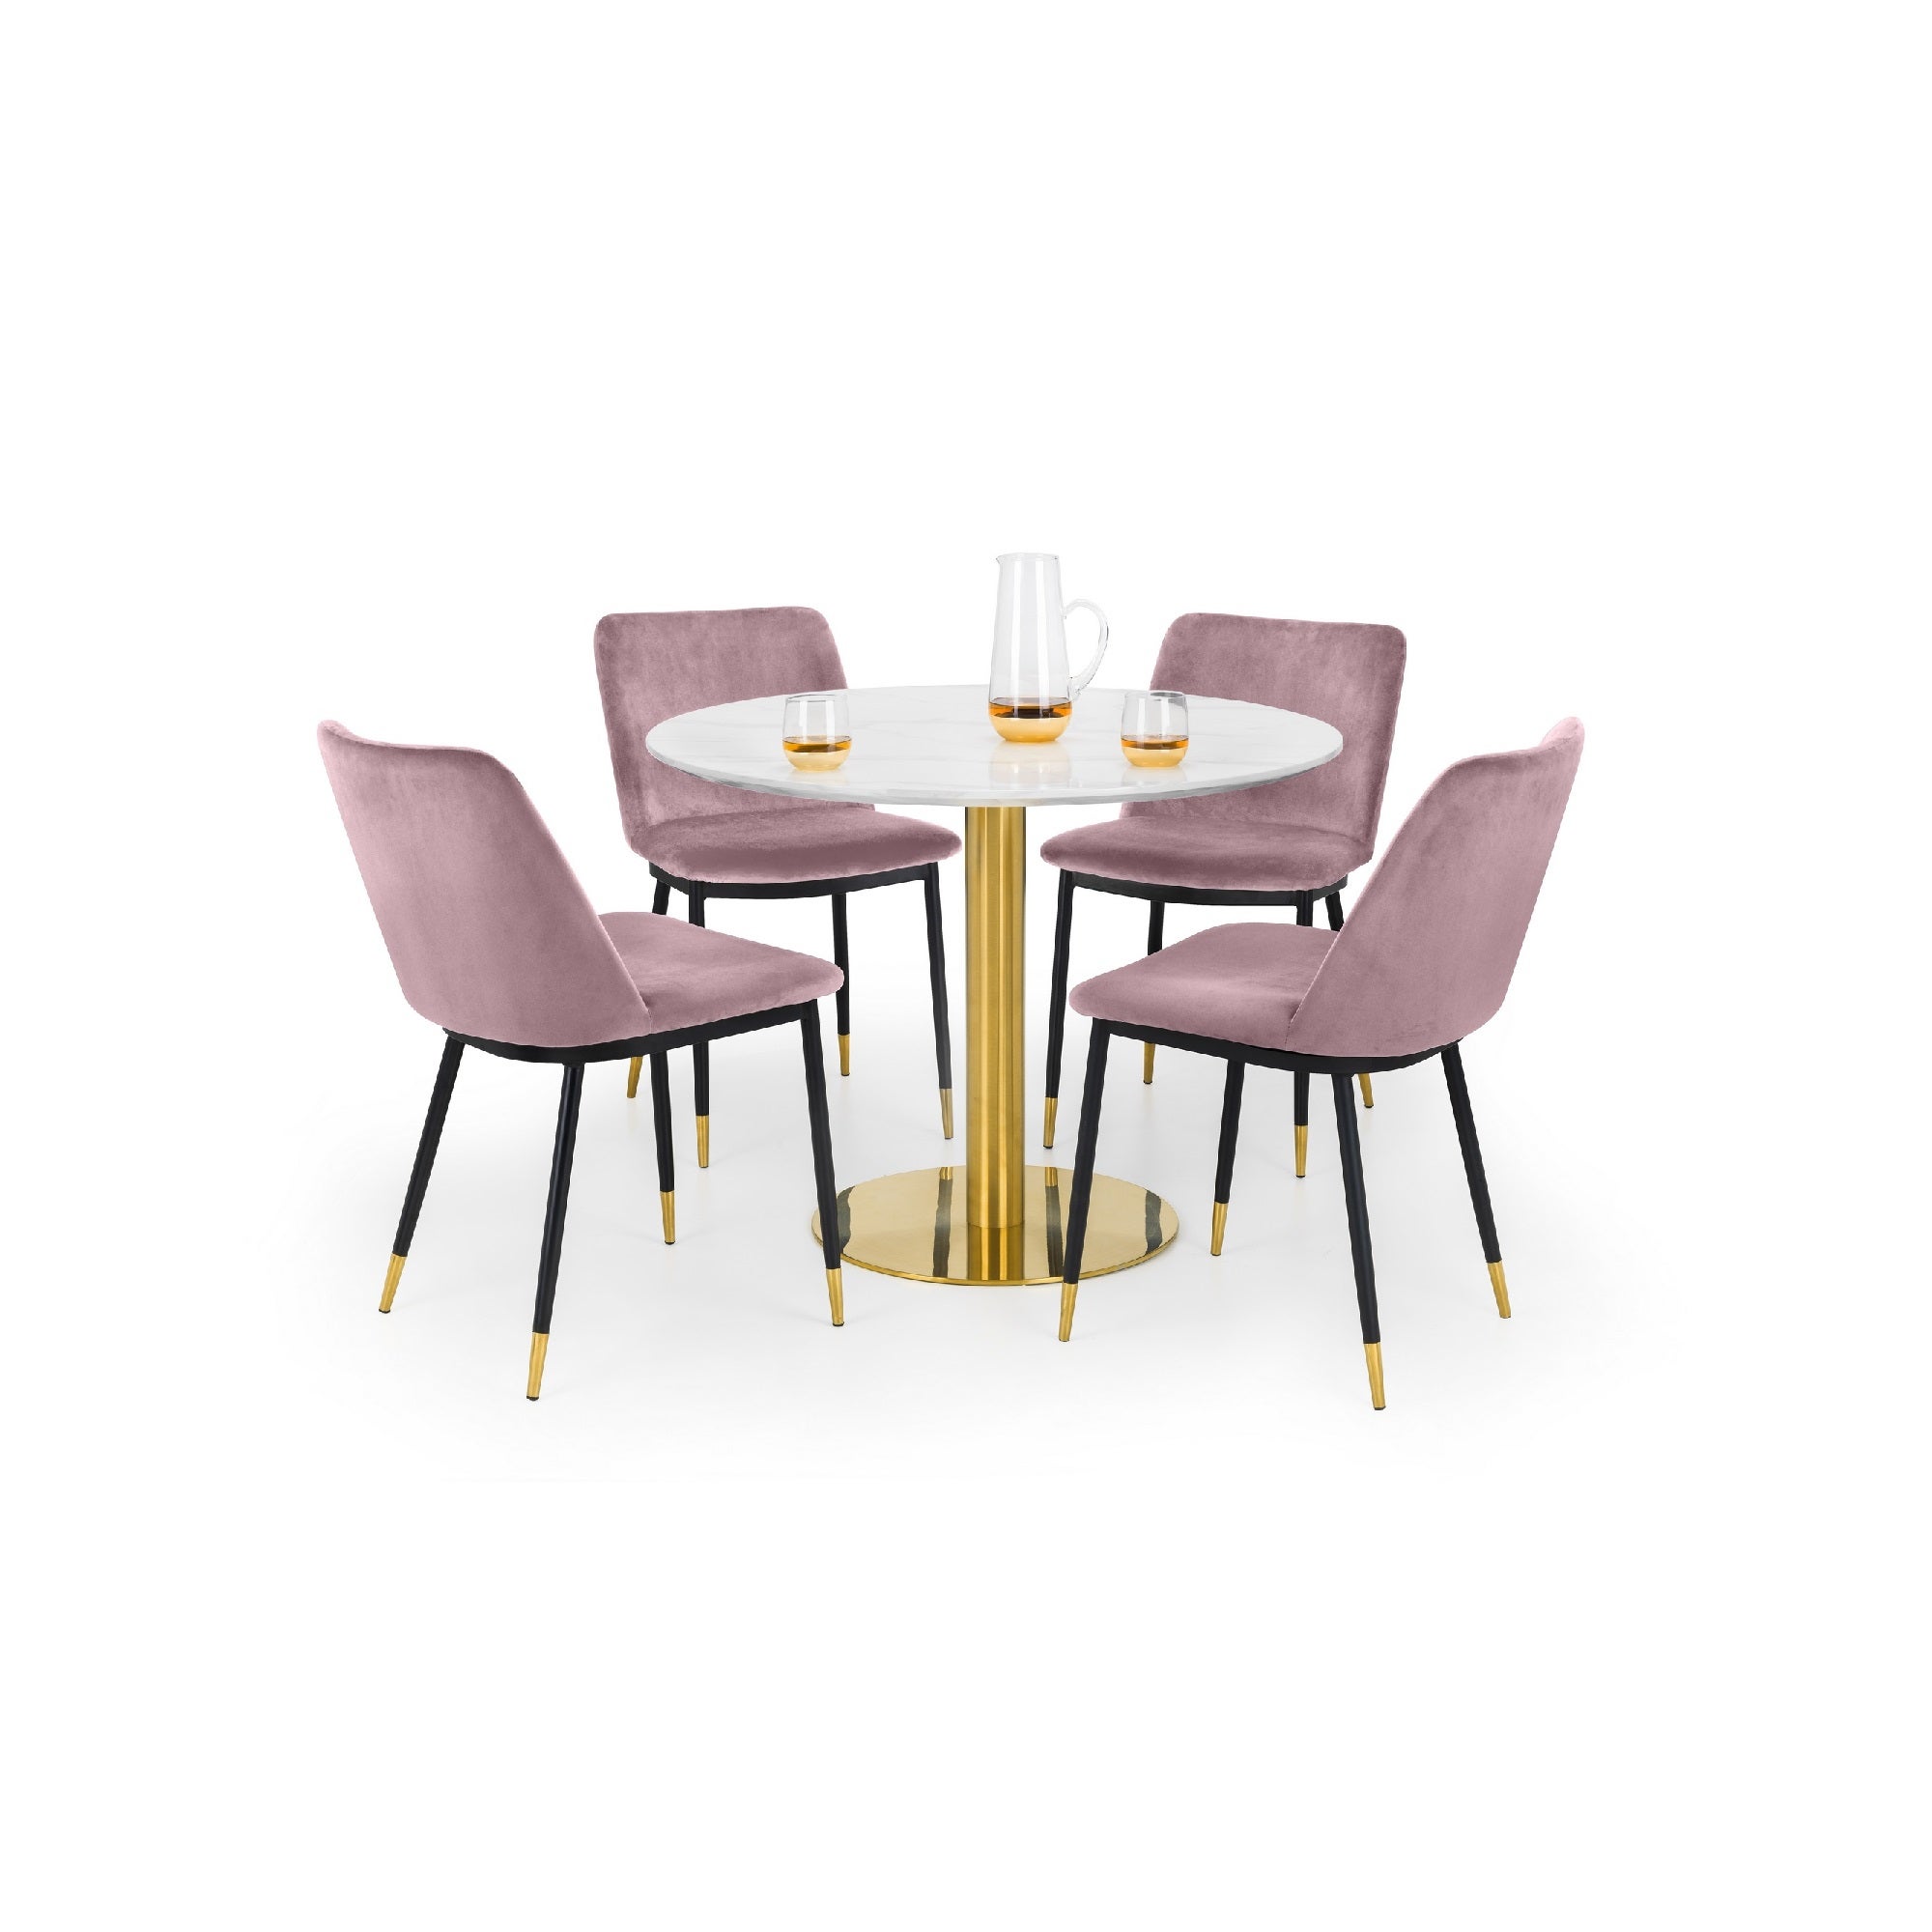 Palermo Round Dining Table With 4 Delaunay Chairs Pink